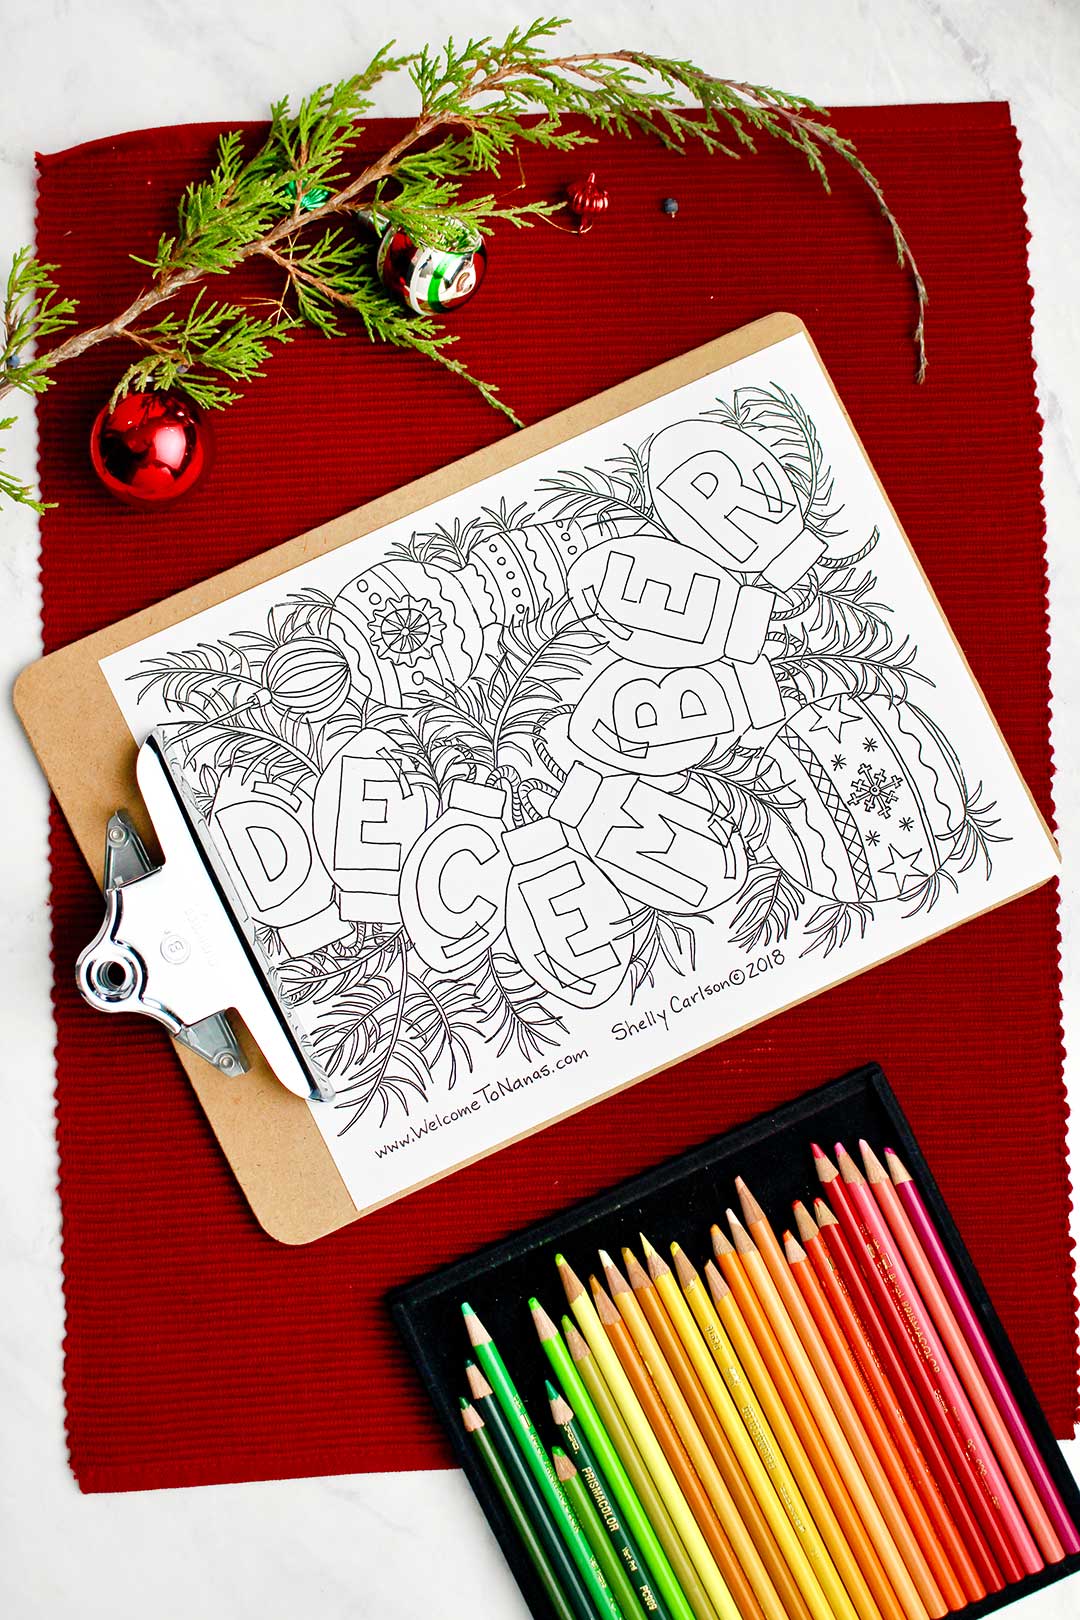 Uncolored December coloring page on a clip board resting on red placemat with holiday decorations and colored pencils near by.